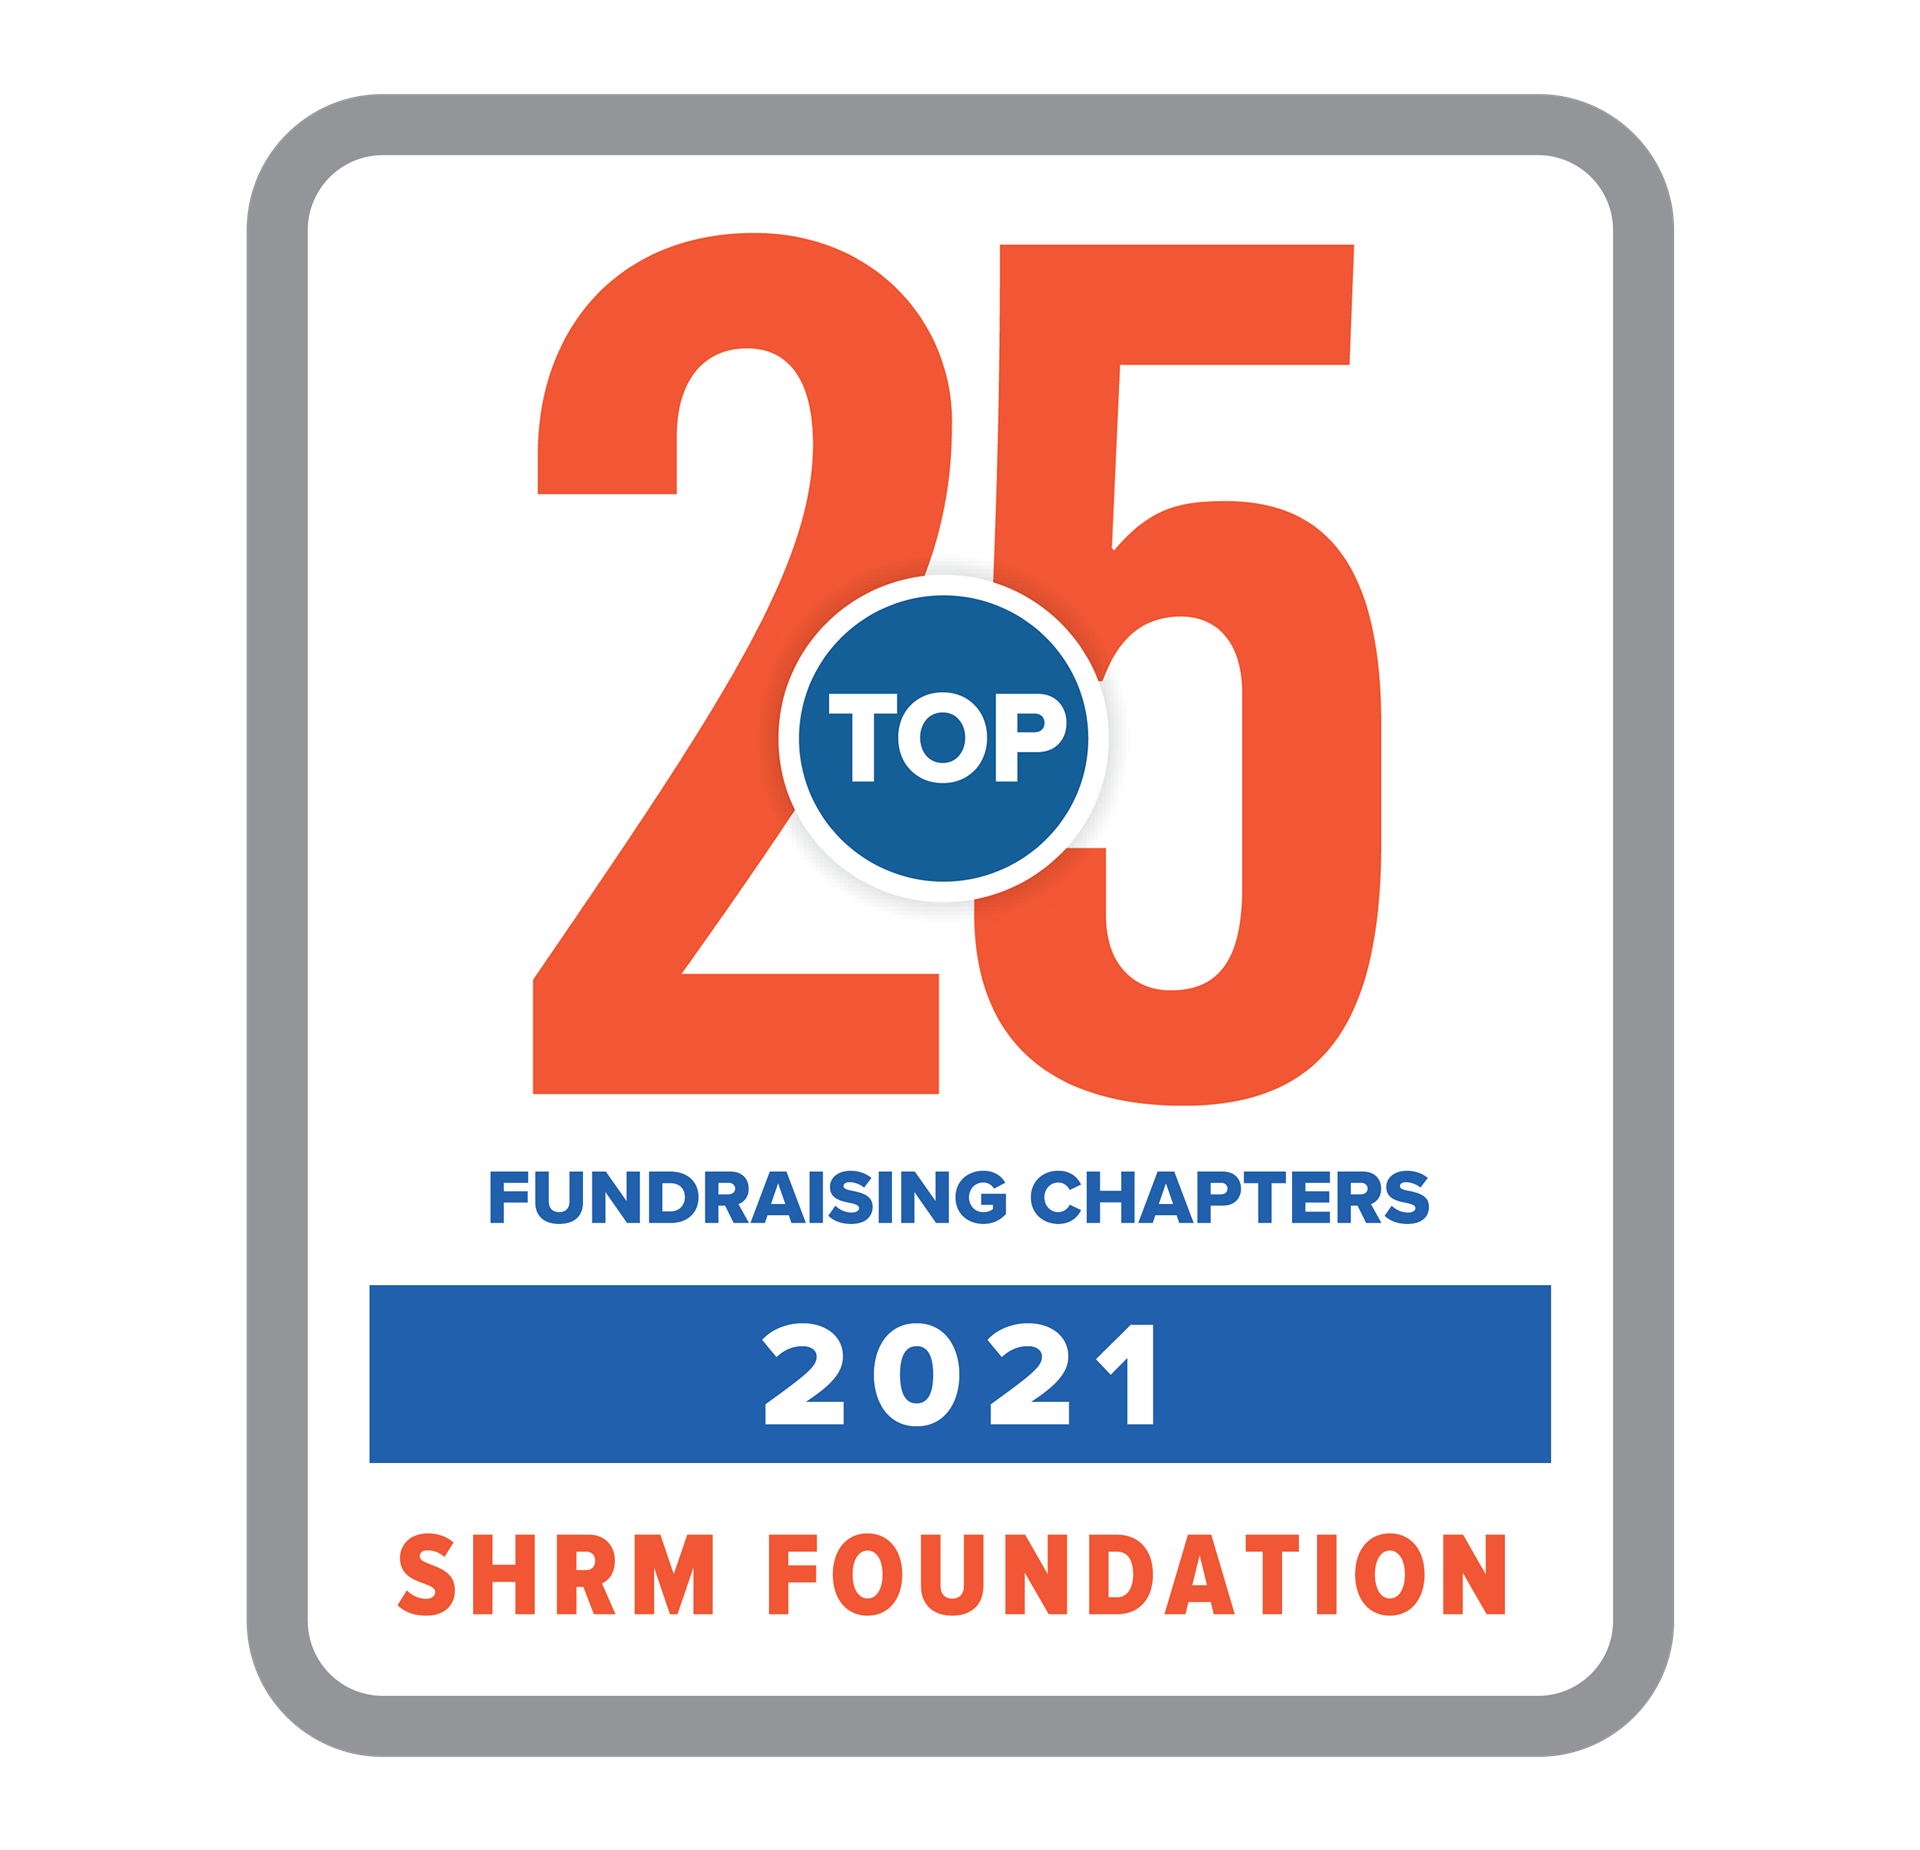 Logo for Top 25 fundraising chapters in 2021 for the SHRM Foundation, in red and blue type